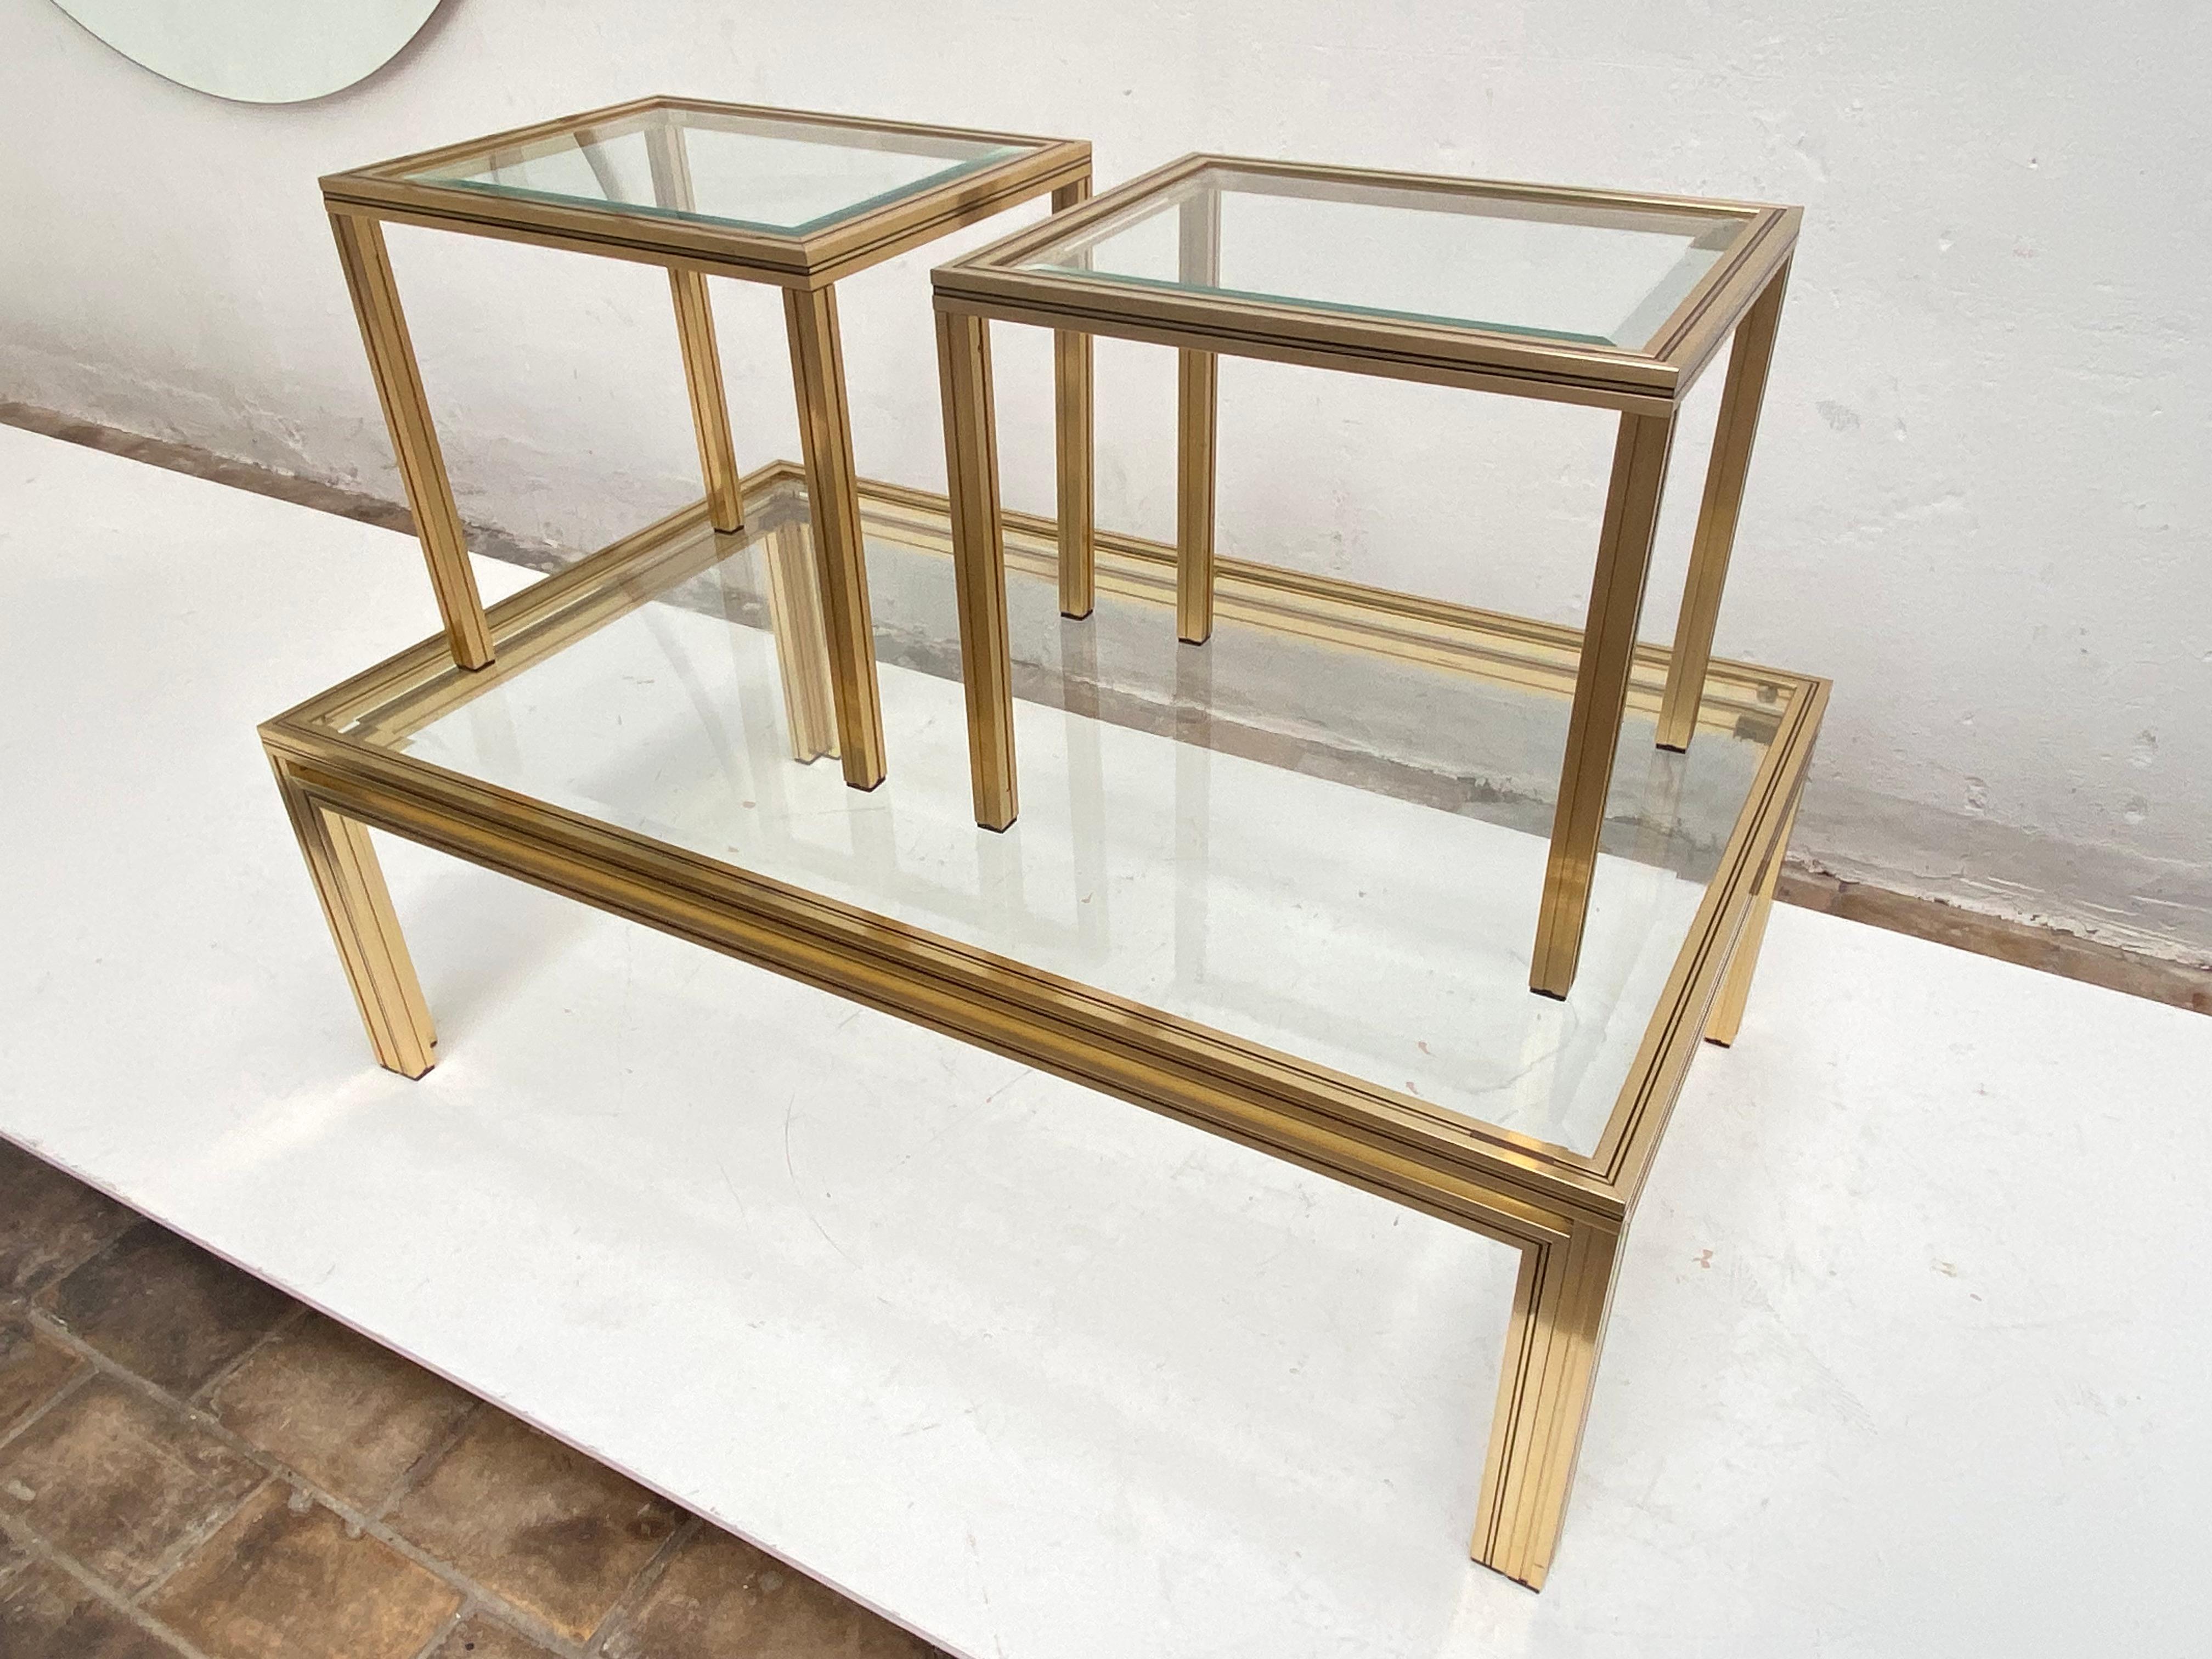 Large Hollywood Regency coffee table and 2 side tables by Pierre Vandel Paris 1970's

Gold colour anodised Aluminium frames and hardened facet cut glass tops

Marked with manufacturers label to each table 

A minimal yet glamorous looking